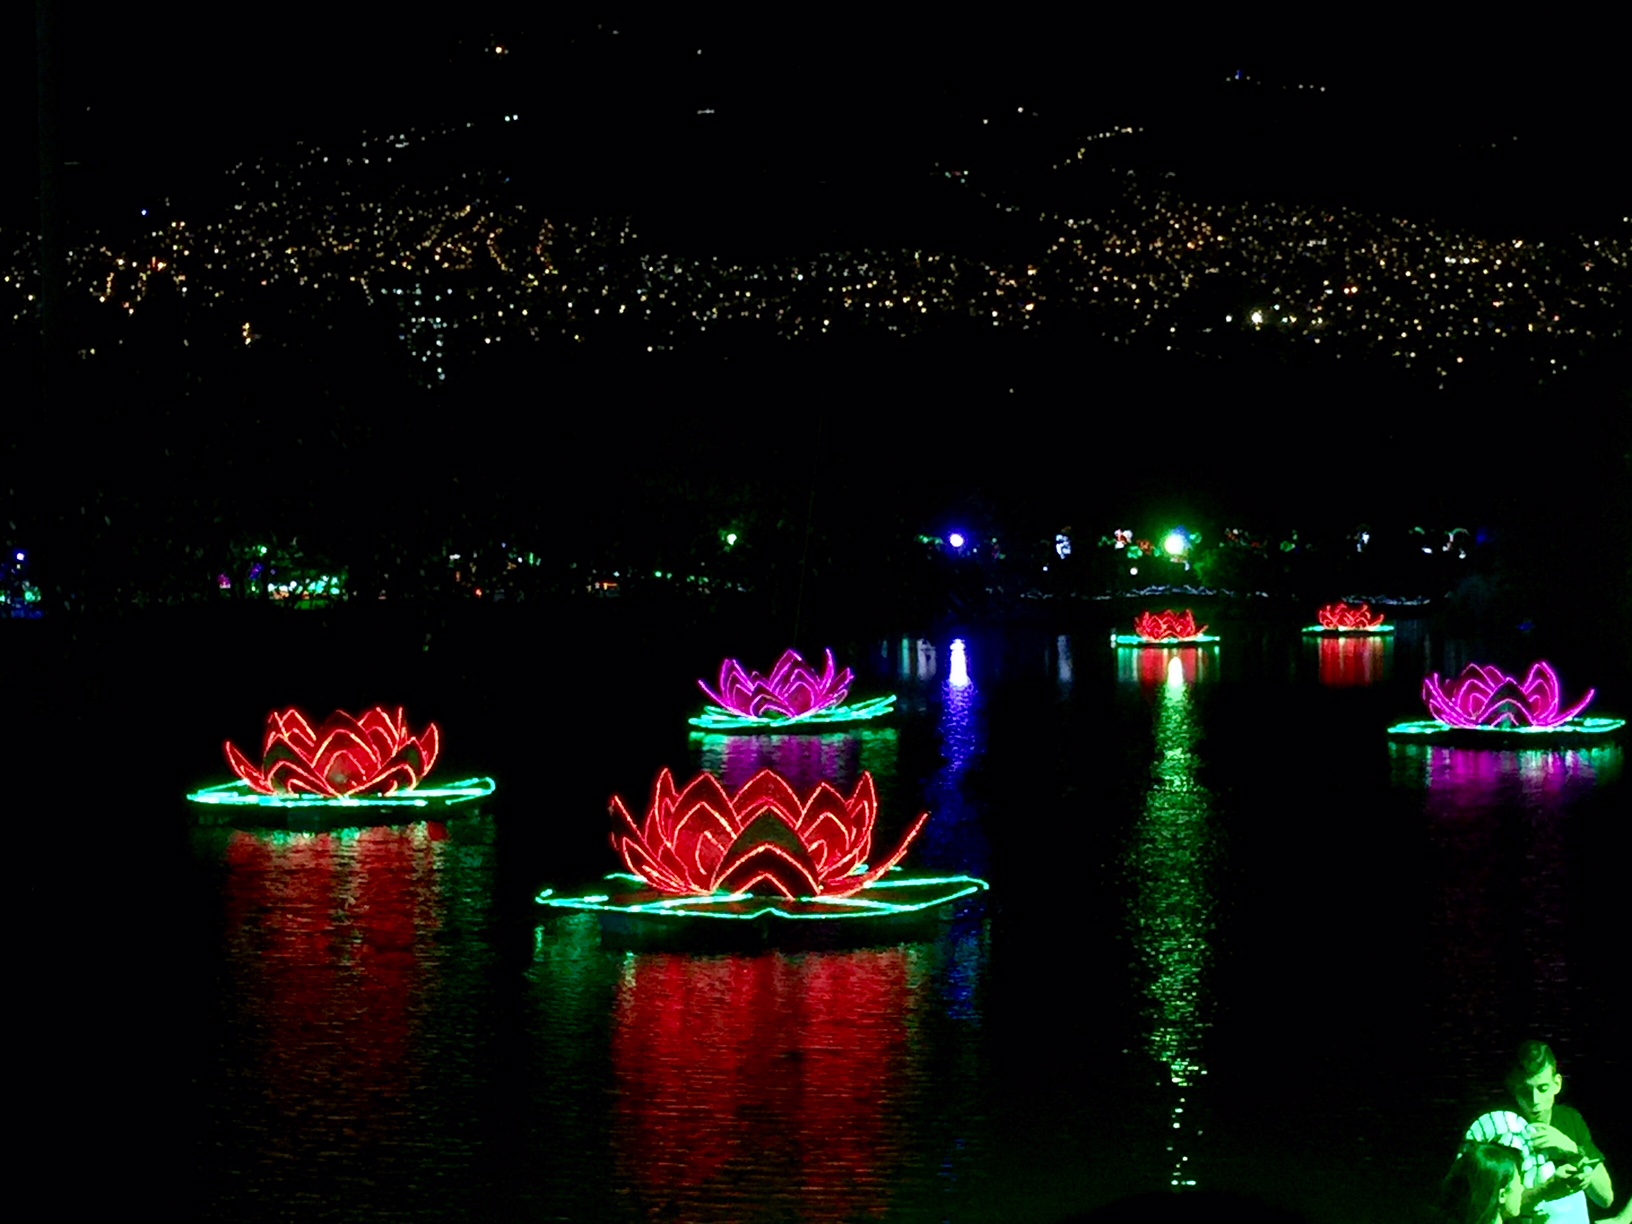 Floating lights with Medellin lights in the background